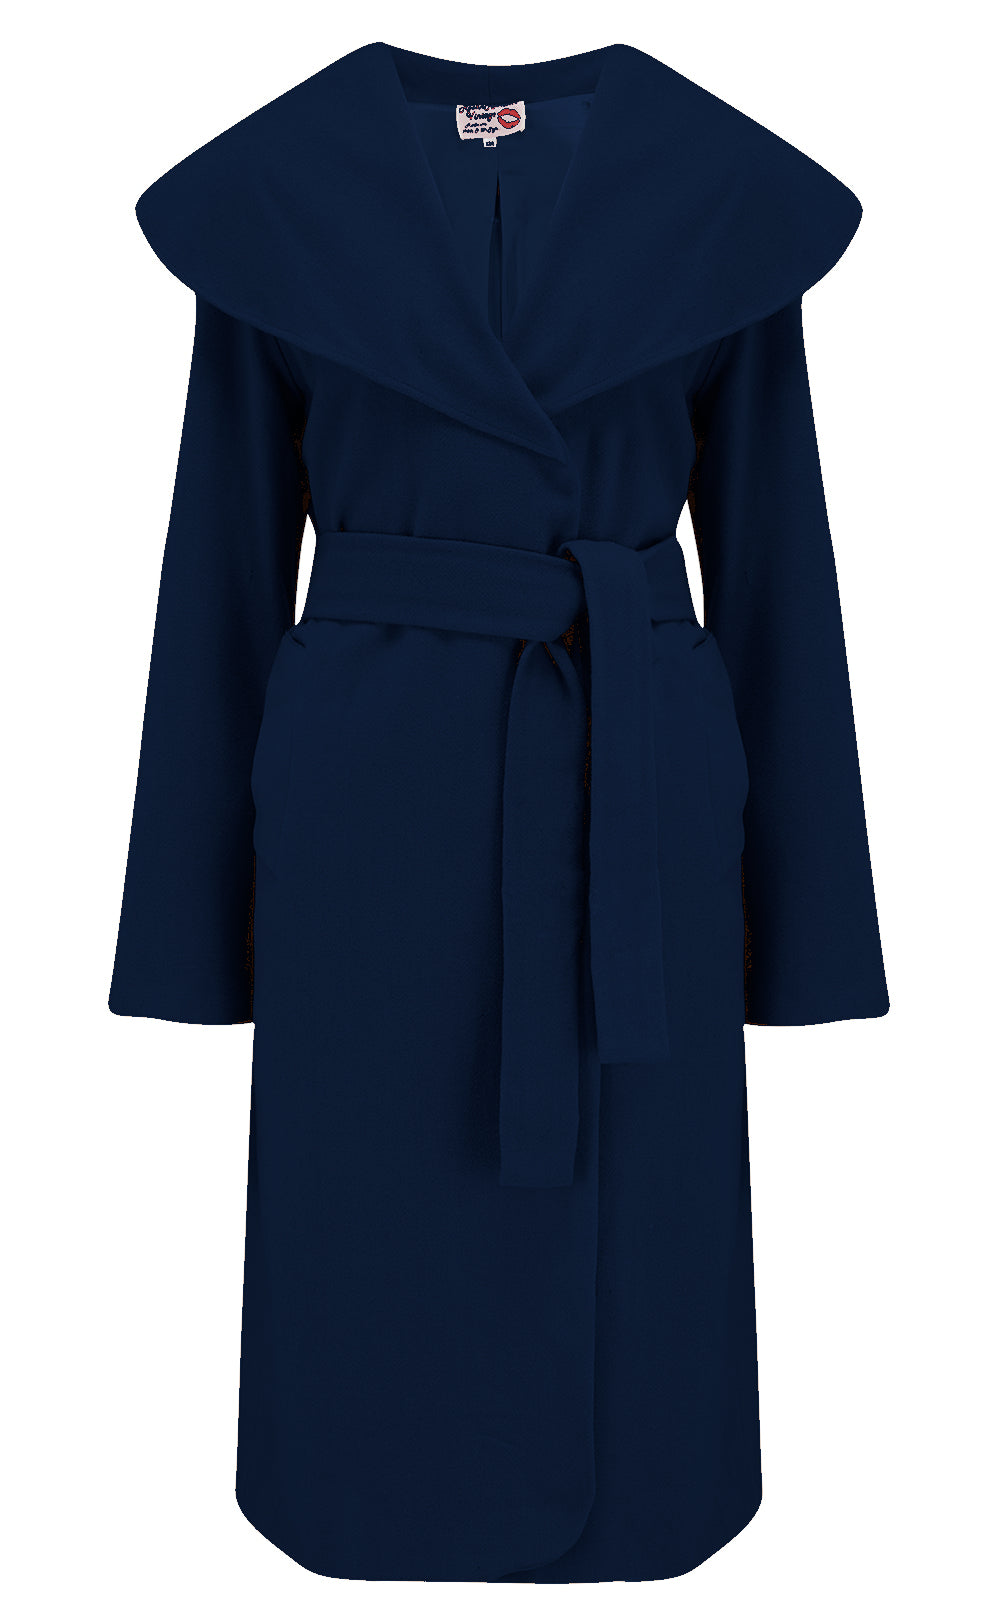 The "Monroe" Wrap Coat in Navy Blue.. True & Authentic Late 1940s, Early 50s Vintage Style - True and authentic vintage style clothing, inspired by the Classic styles of CC41 , WW2 and the fun 1950s RocknRoll era, for everyday wear plus events like Goodwood Revival, Twinwood Festival and Viva Las Vegas Rockabilly Weekend Rock n Romance Rock n Romance